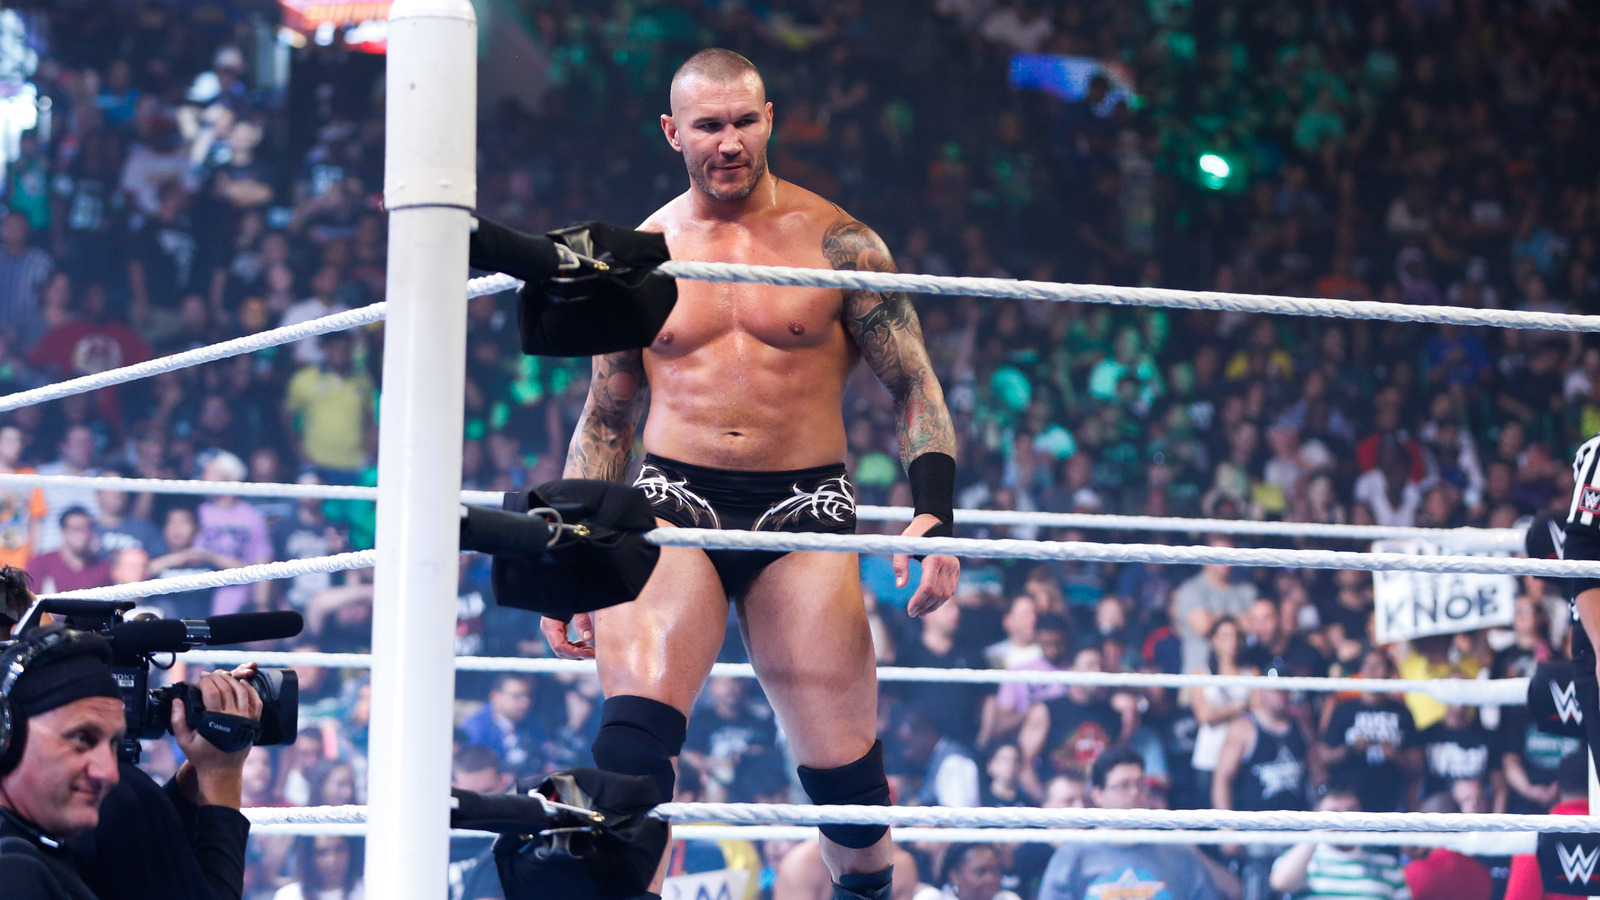 Randy Orton Returns At WWE Survivor Series, Leads WarGames Team To Victory